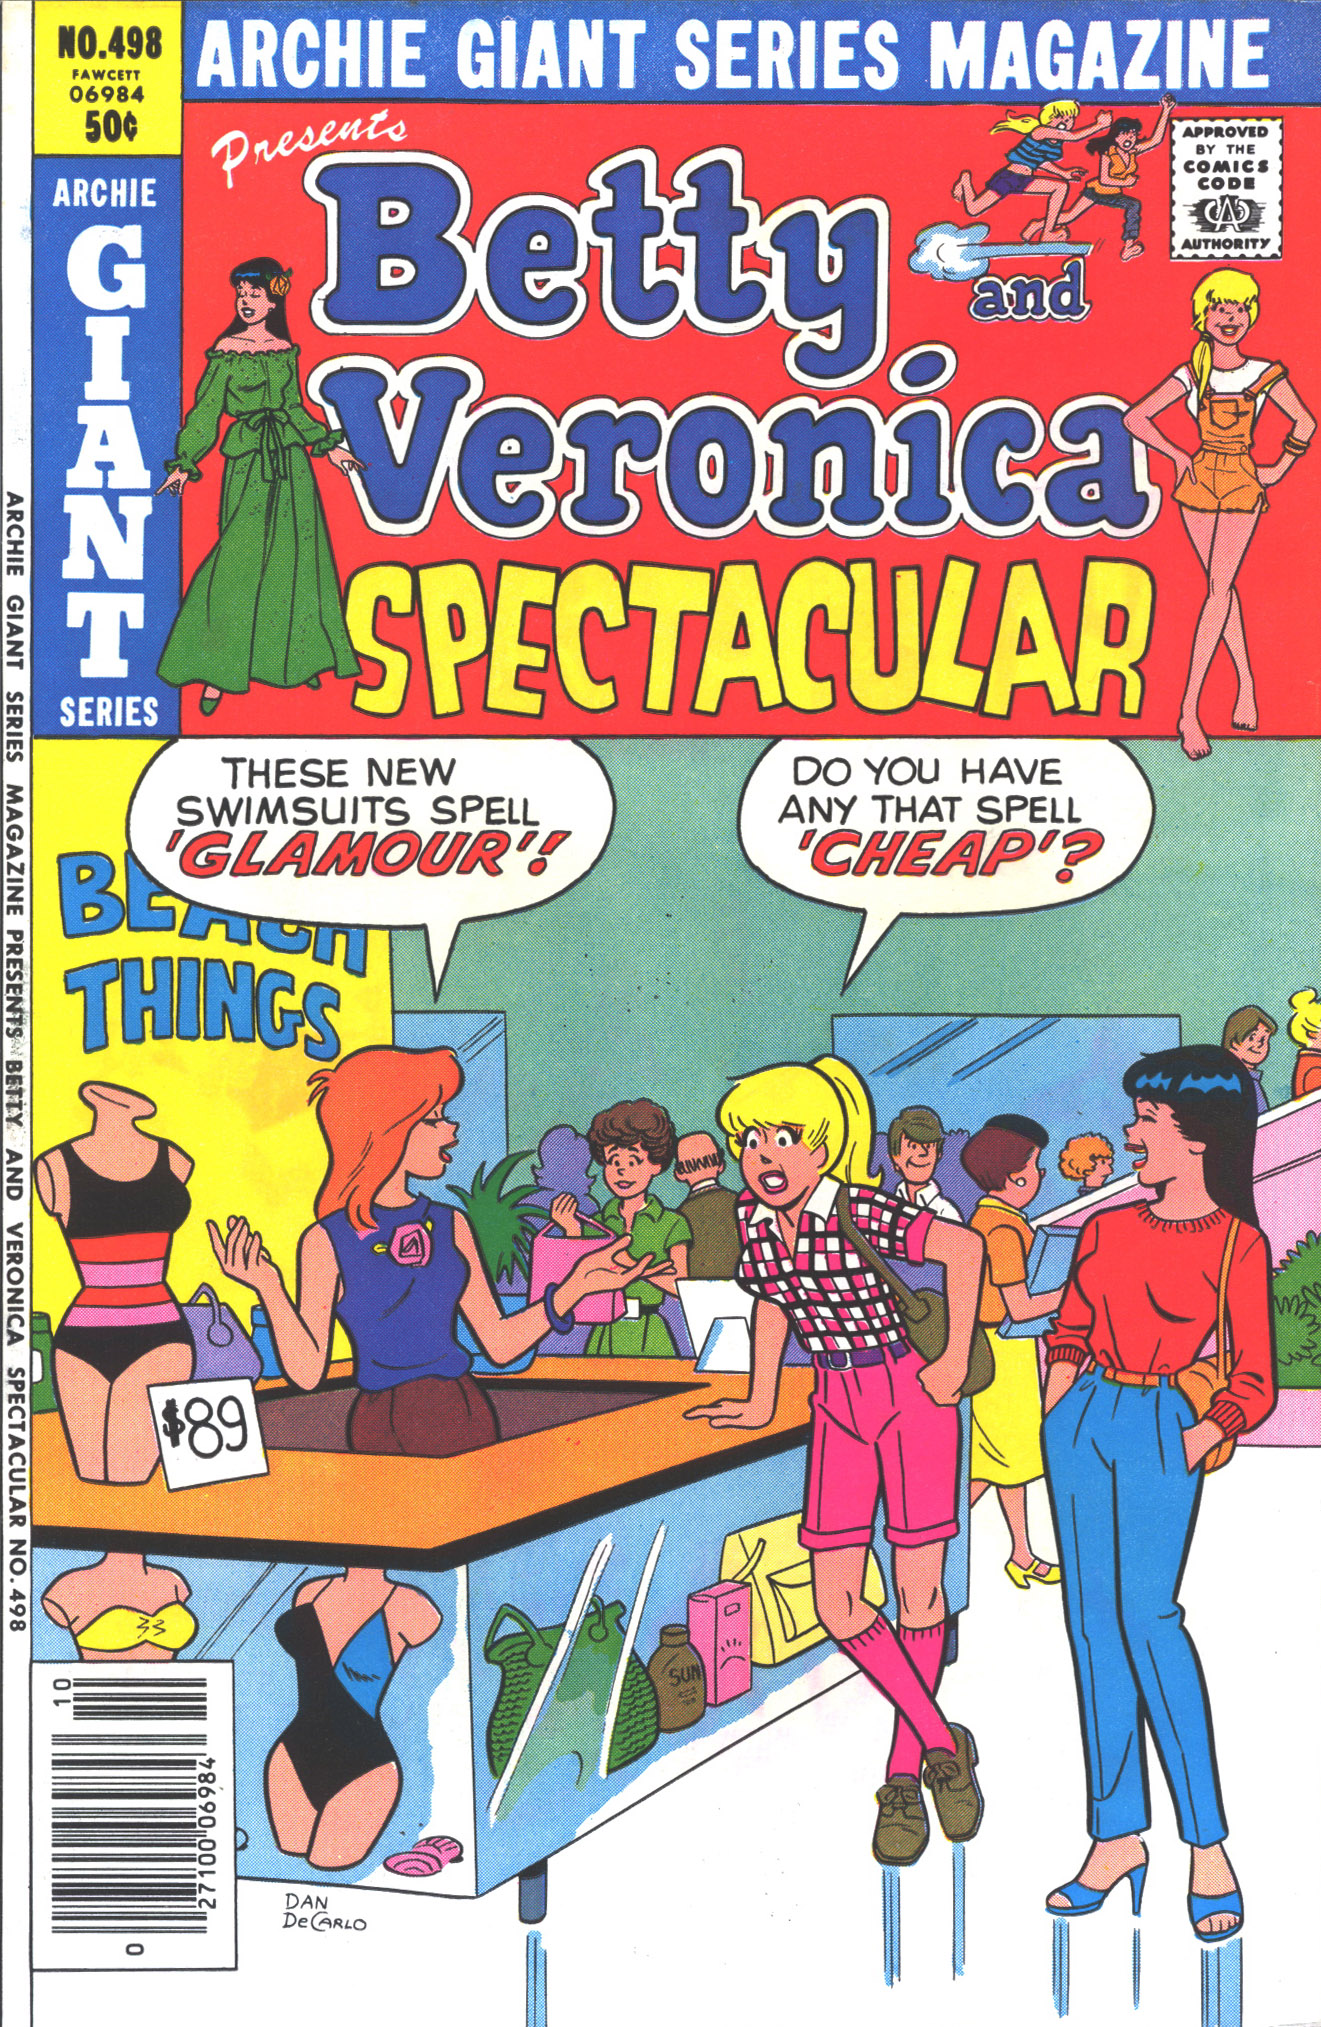 Read online Archie Giant Series Magazine comic -  Issue #498 - 1